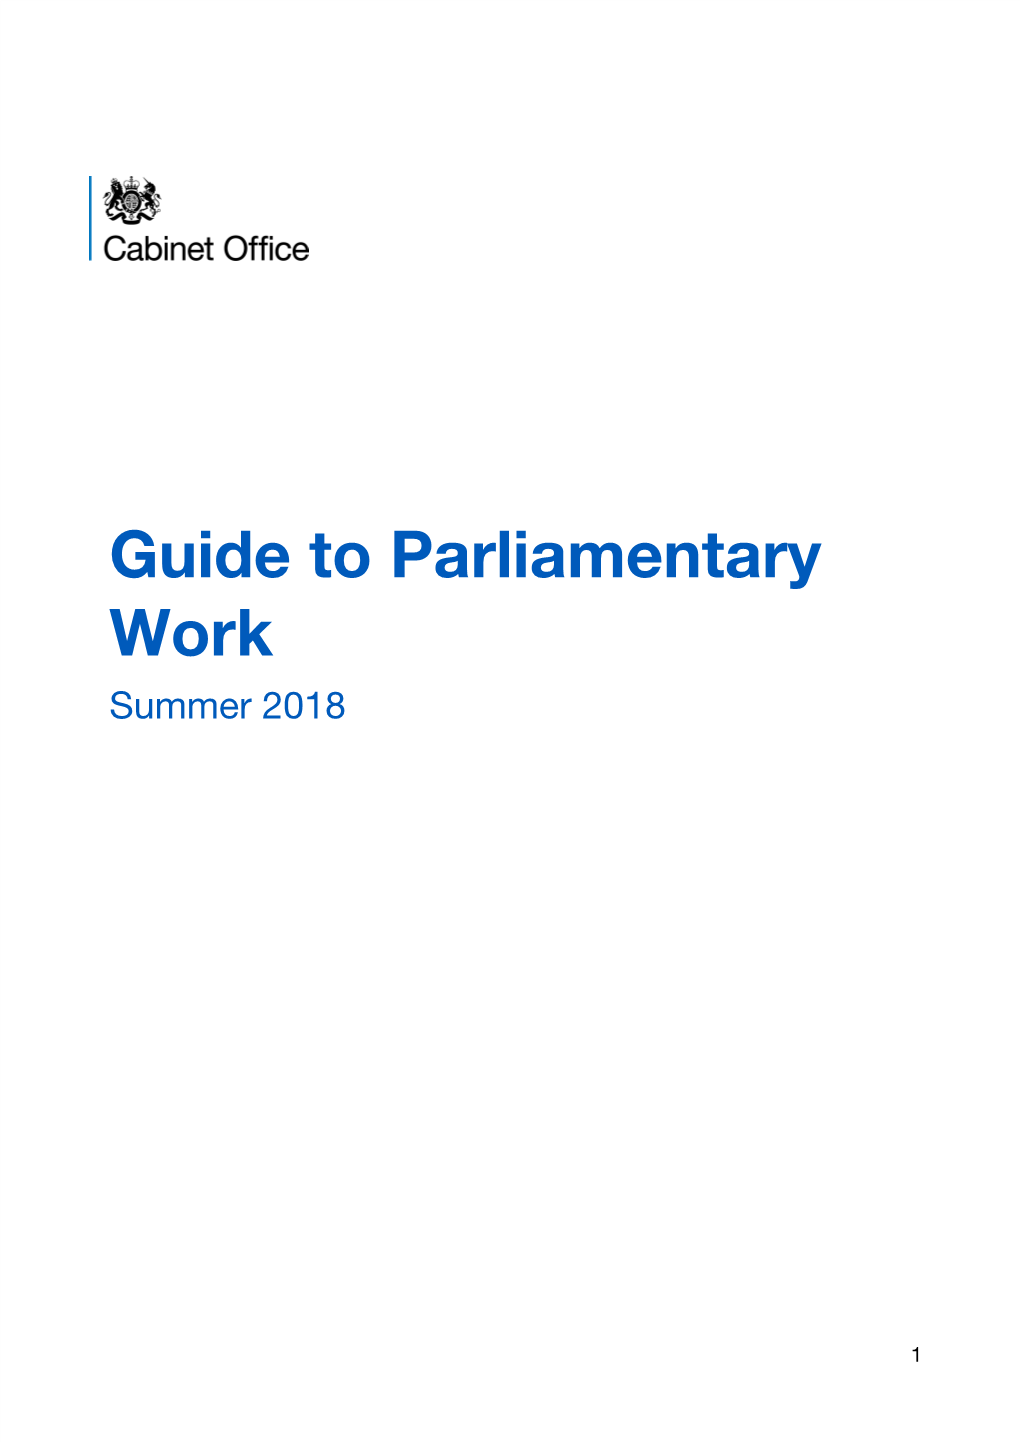 Guide to Parliamentary Work Summer 2018